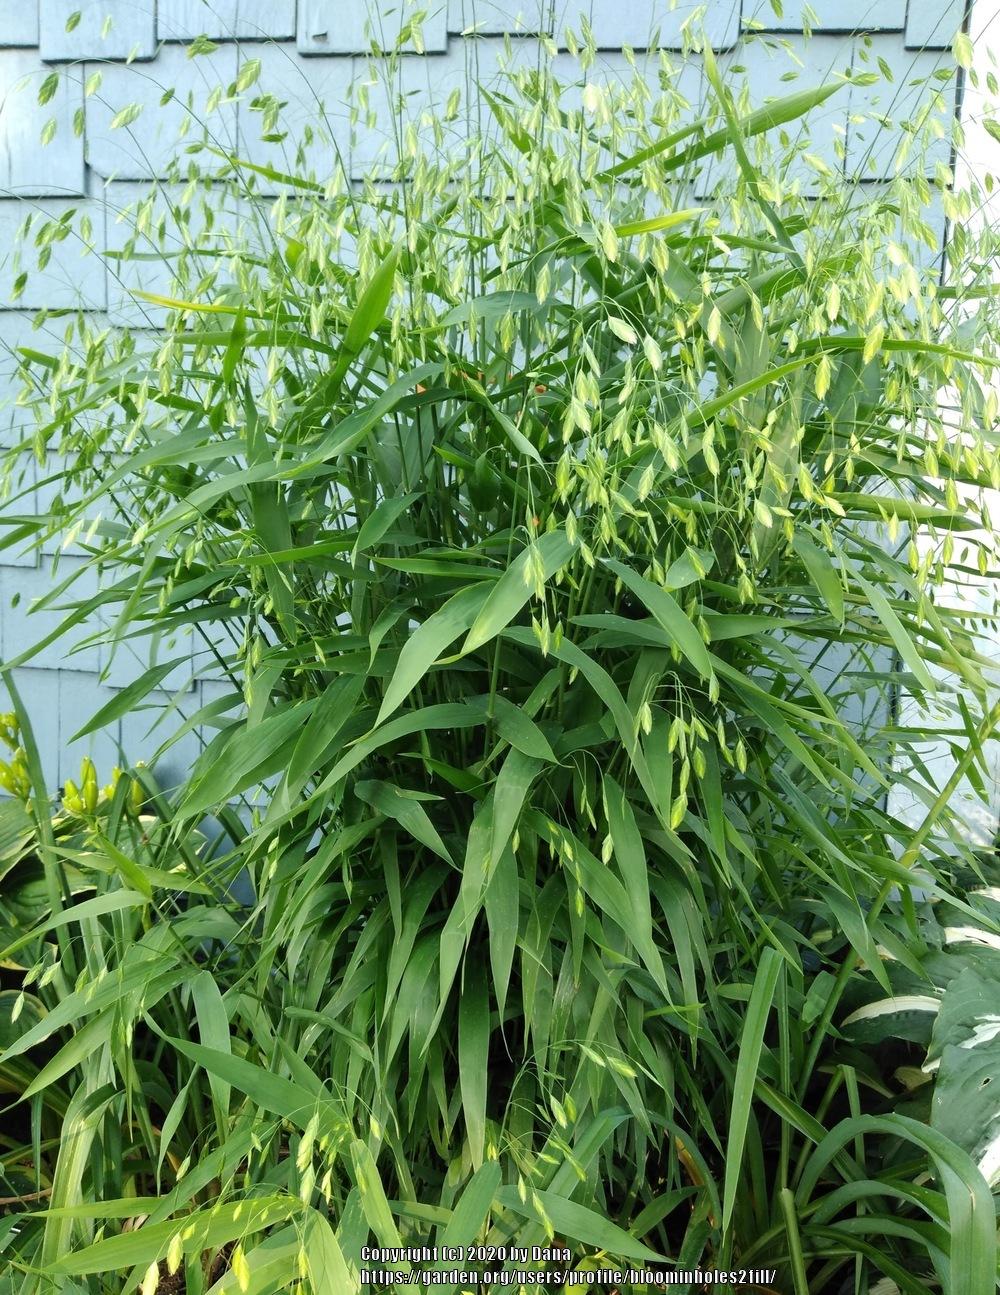 Photo of Northern Sea Oats (Chasmanthium latifolium) uploaded by bloominholes2fill